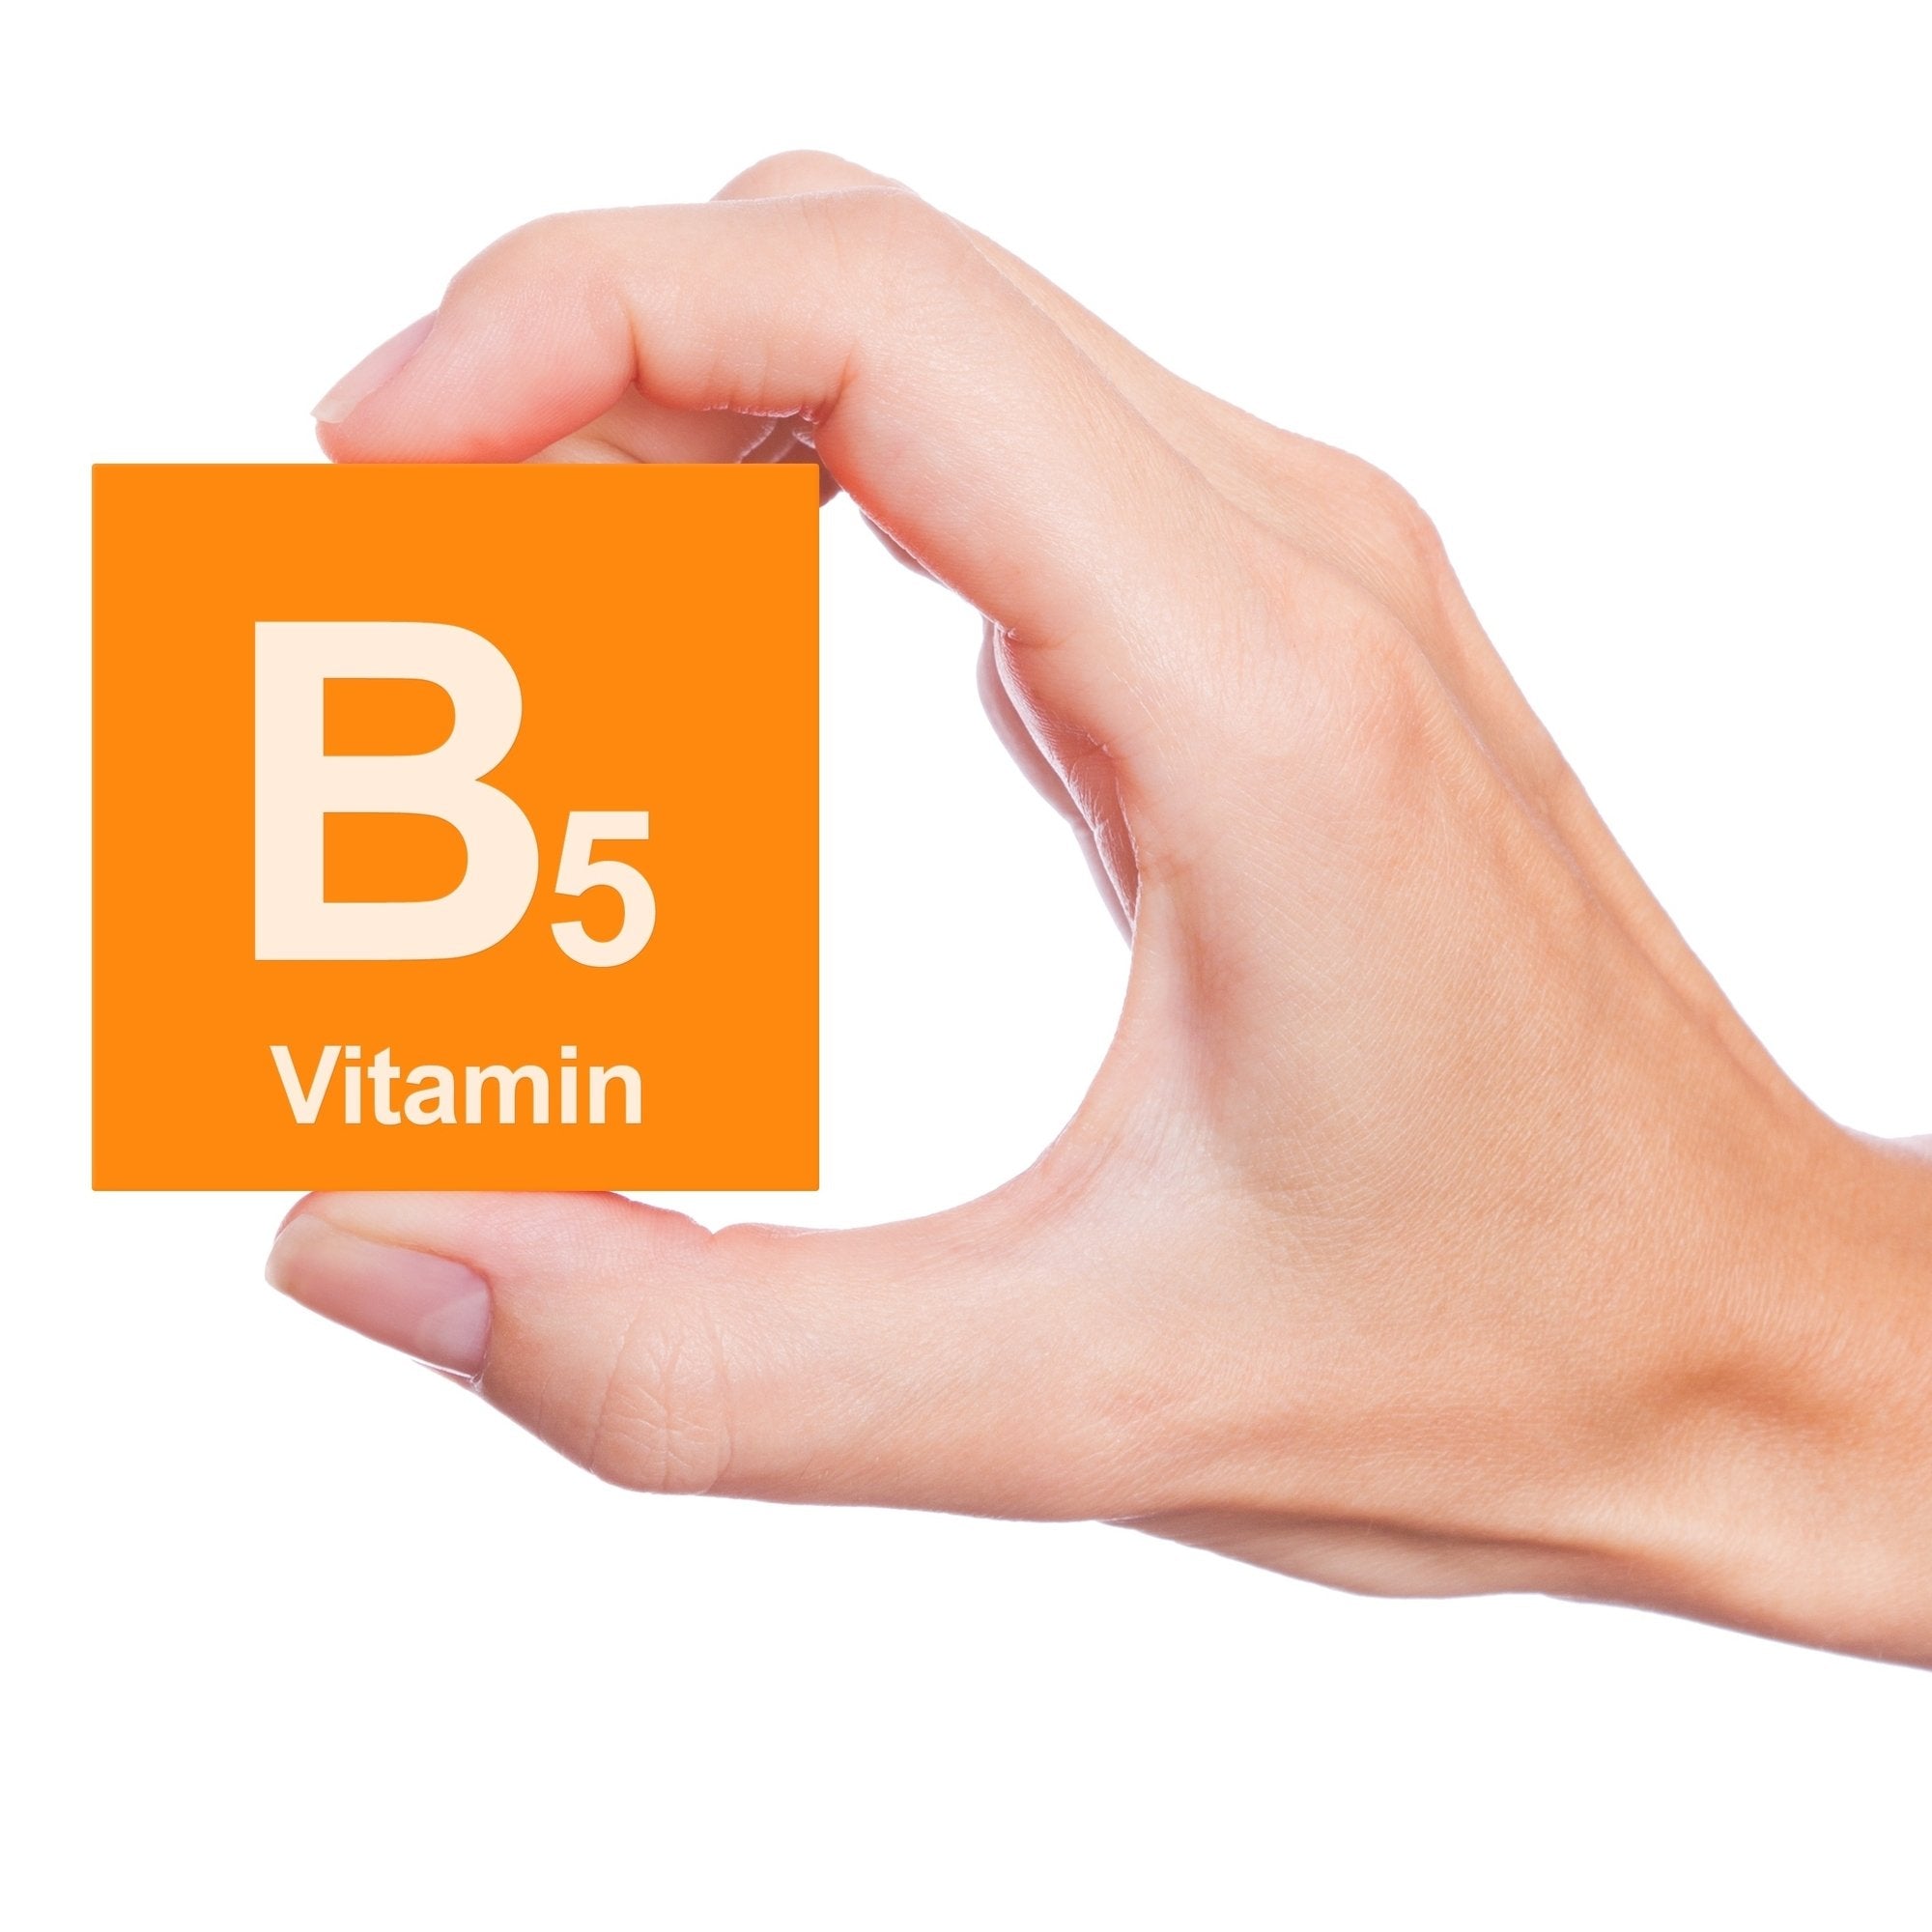 6 Benefits Of Vitamin B5 For Your Skin